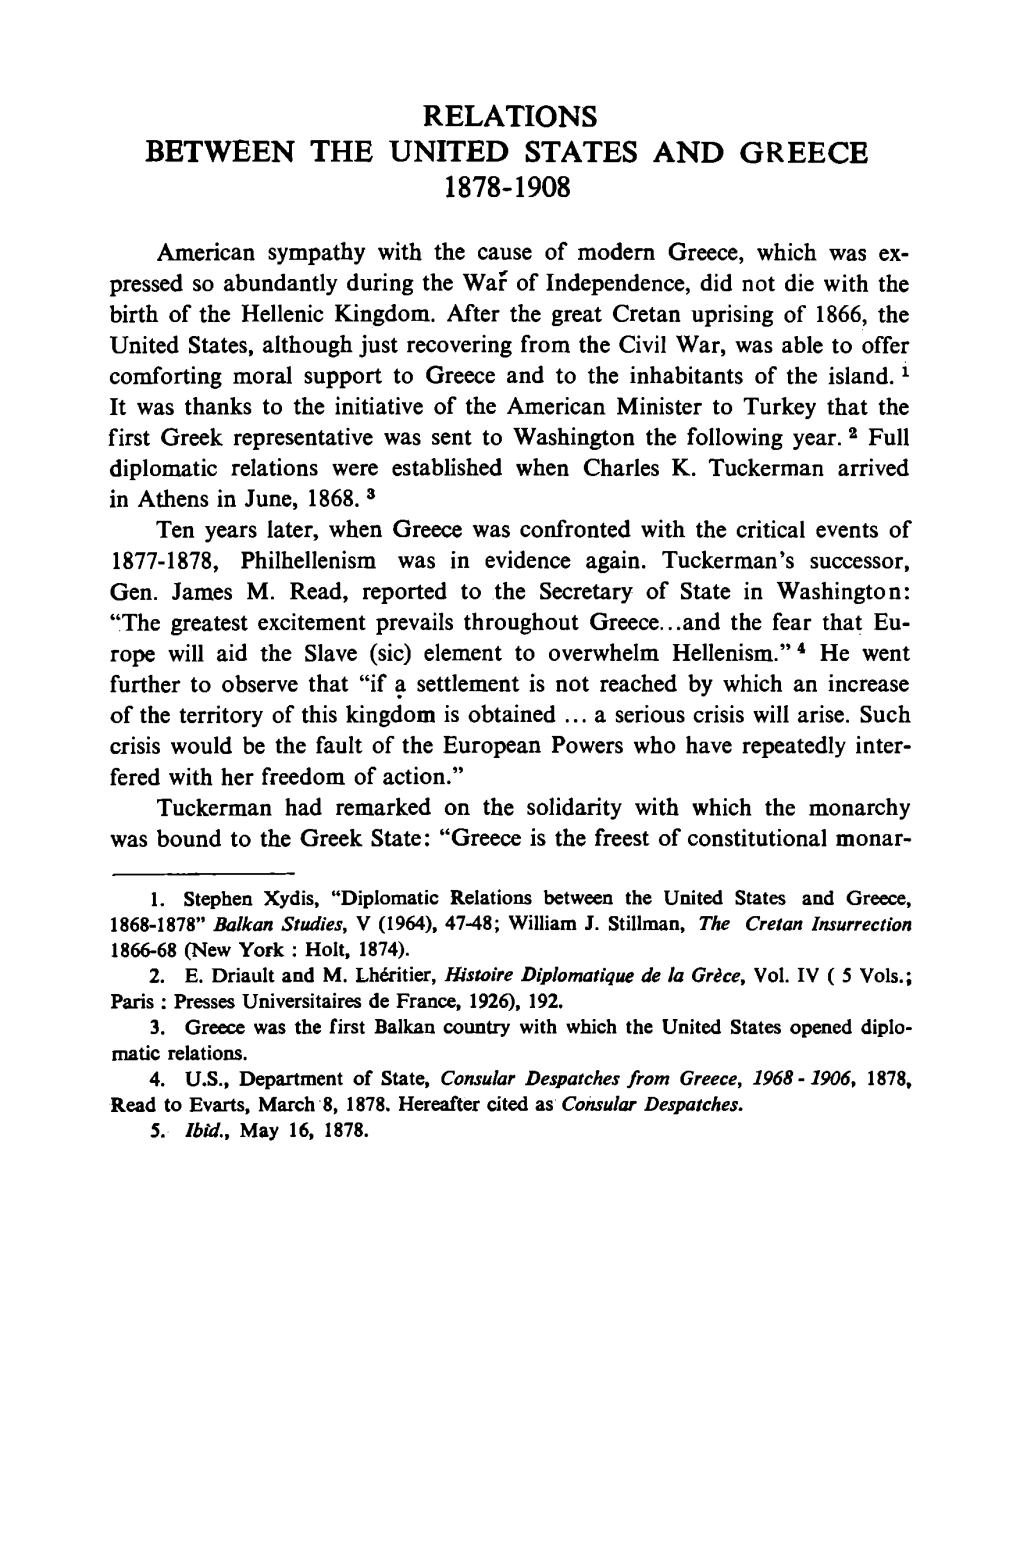 Relations Between the United States and Greece 1878-1908